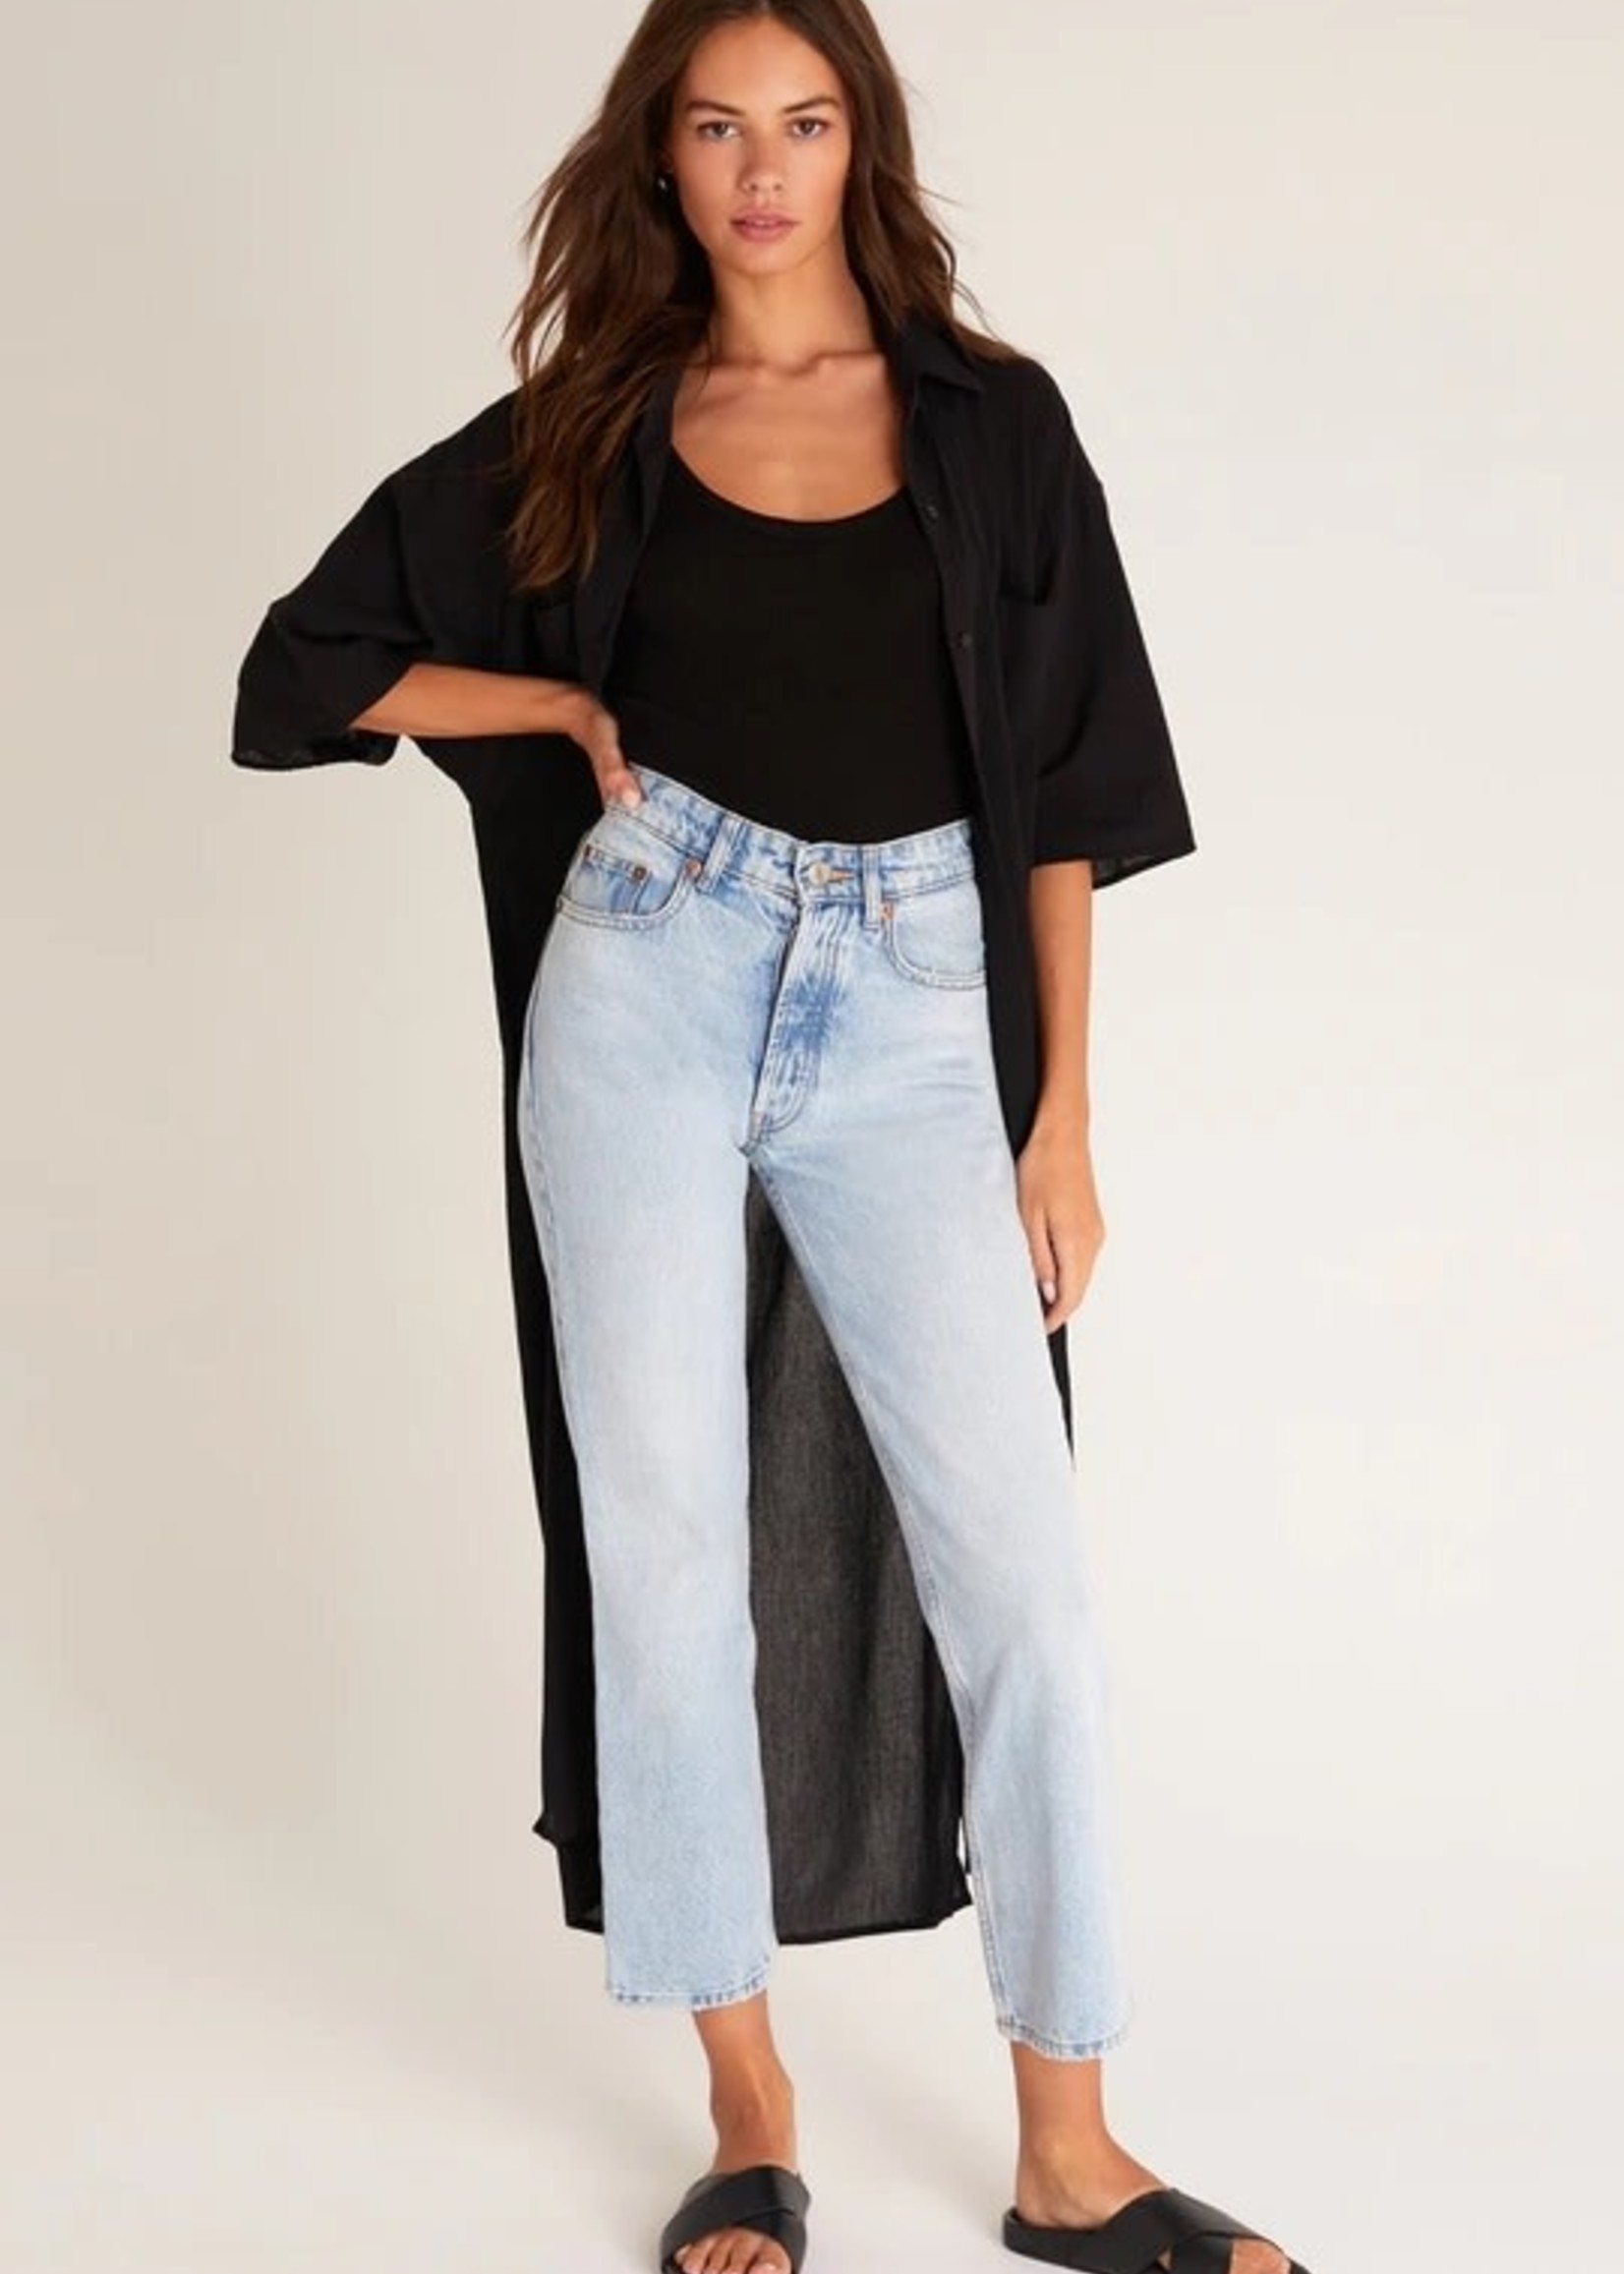 Z supply Lina Button Up Duster